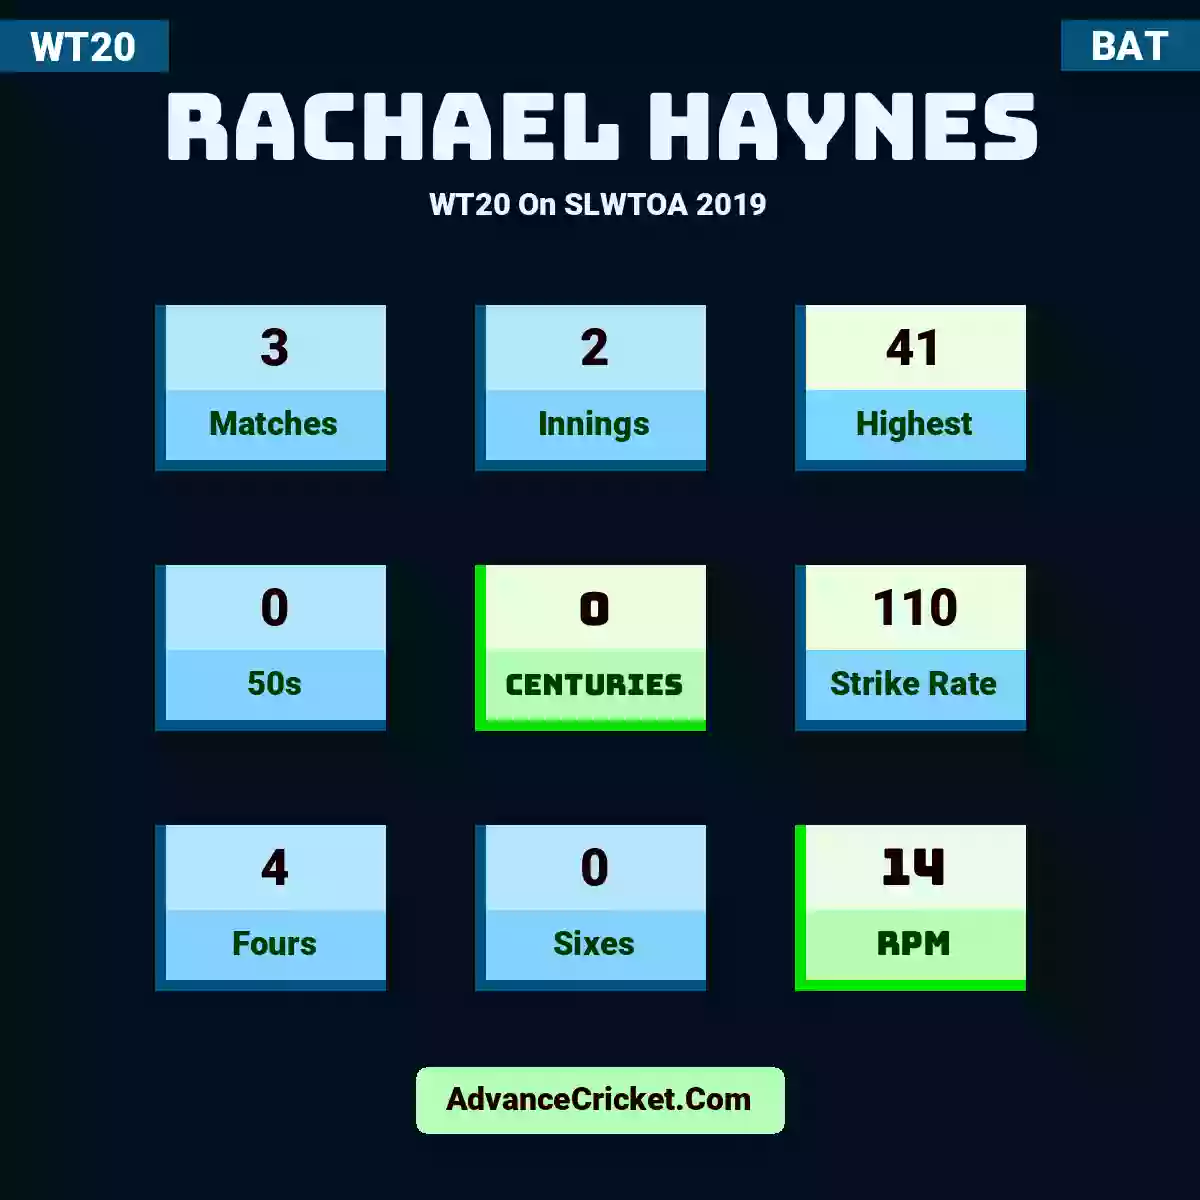 Rachael Haynes WT20  On SLWTOA 2019, Rachael Haynes played 3 matches, scored 41 runs as highest, 0 half-centuries, and 0 centuries, with a strike rate of 110. R.Haynes hit 4 fours and 0 sixes, with an RPM of 14.